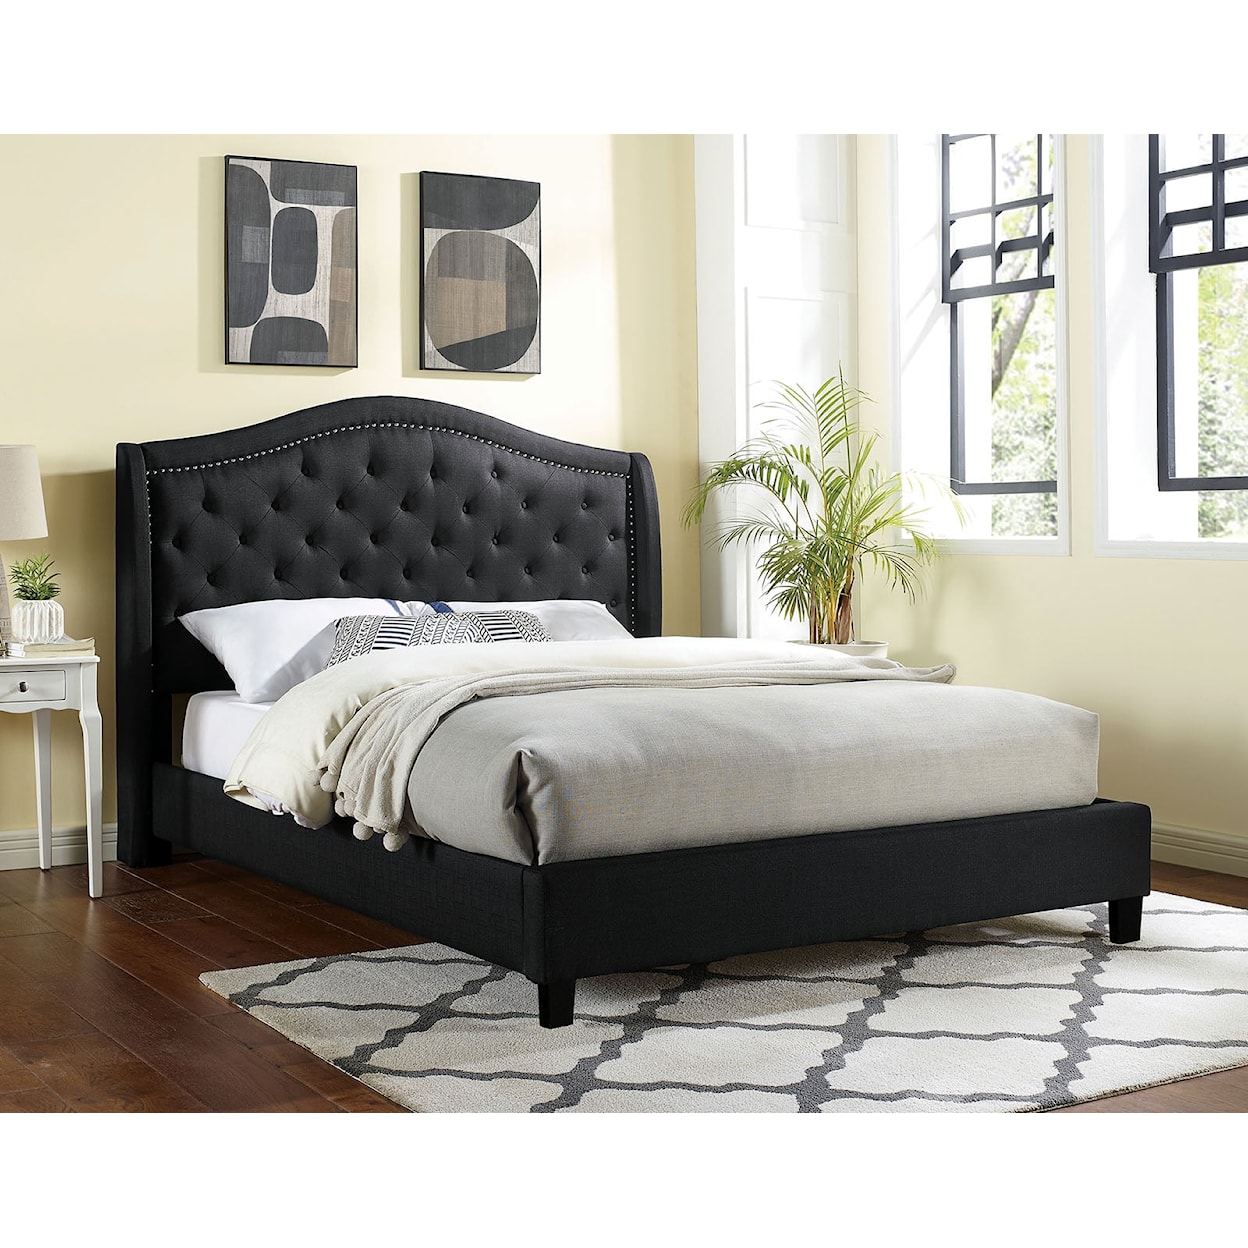 Furniture of America Carly Cal.King Bed, Black